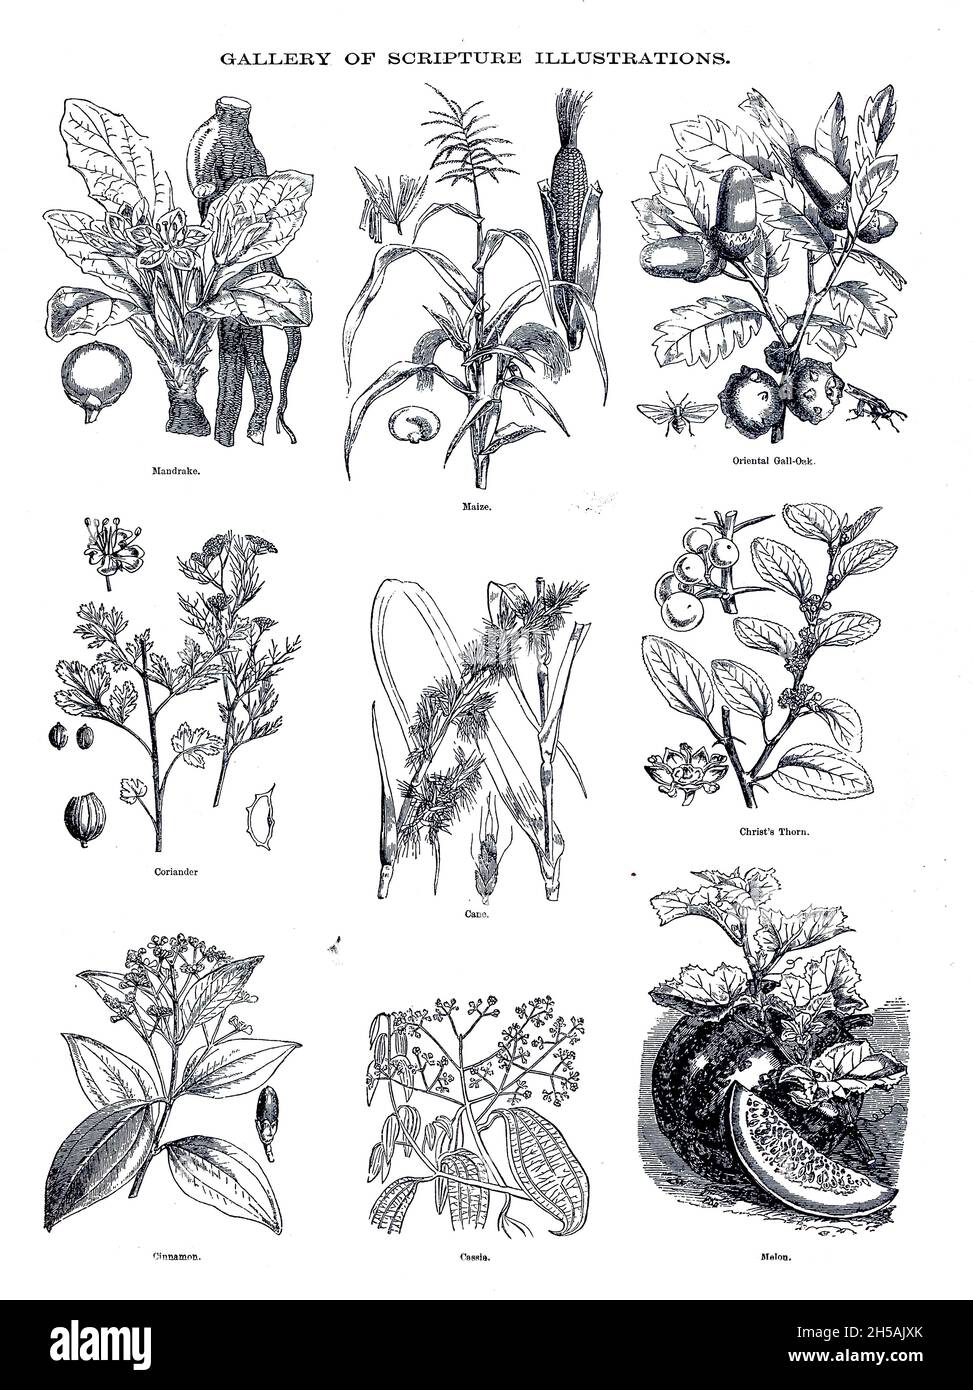 Plants of the Bible Gallery of Scripture Illustrations of plants and crops from ' The Doré family Bible ' containing the Old and New Testaments, The Apocrypha Embellished with Fine Full-Page Engravings, Illustrations and the Dore Bible Gallery. Published in Philadelphia by William T. Amies in 1883 Stock Photo